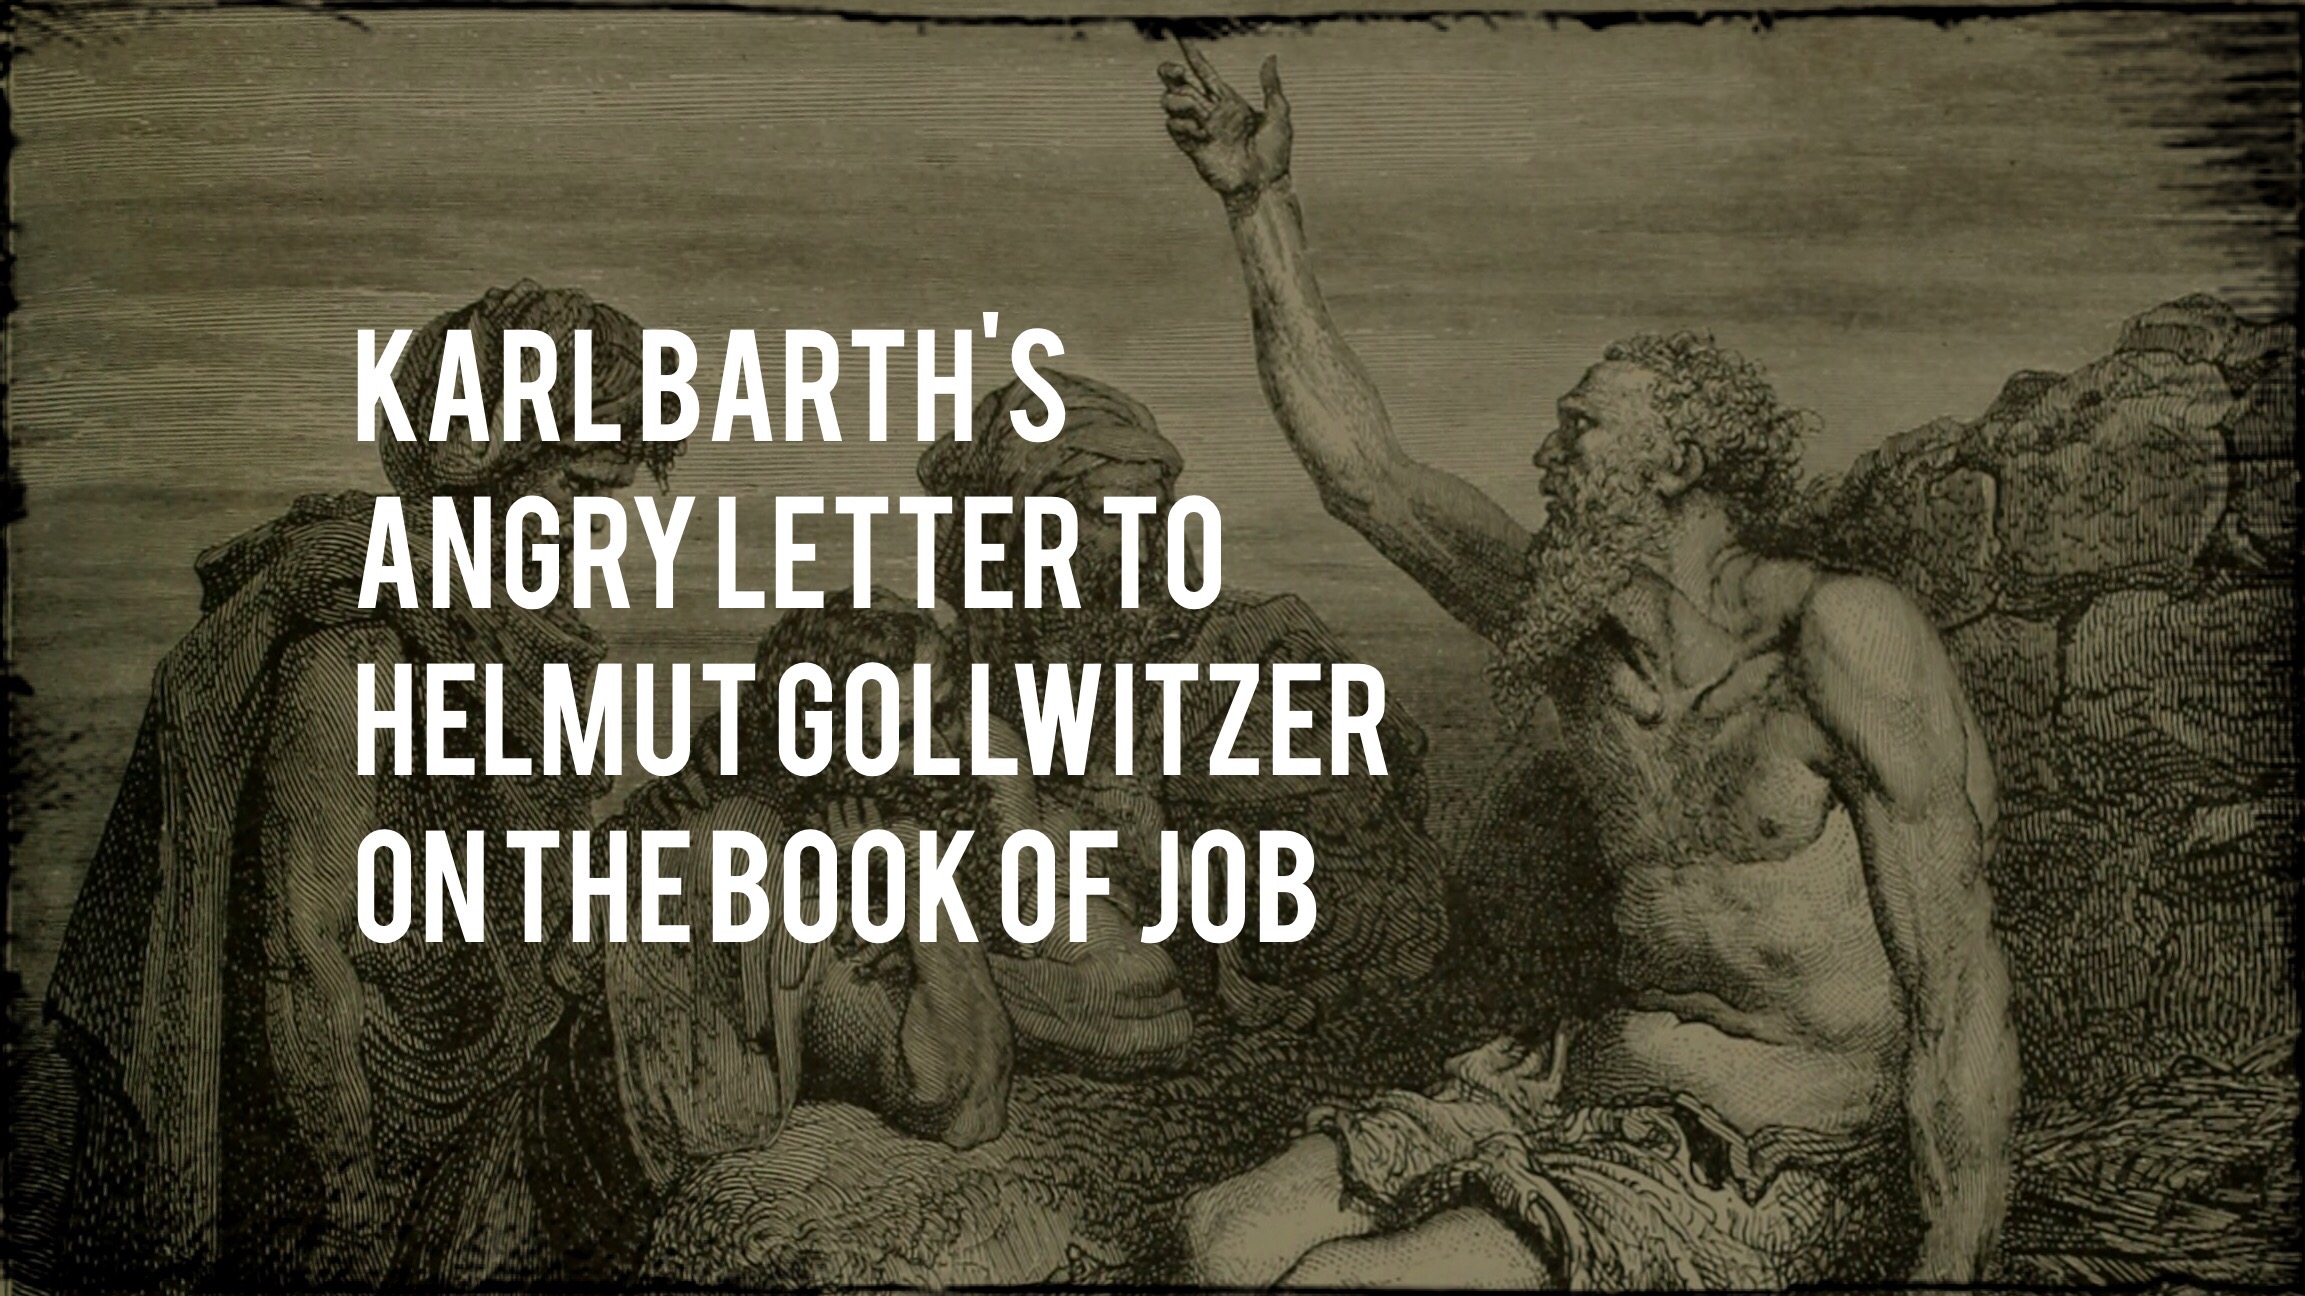 Karl Barth's Angry Letter to Helmut Gollwitzer on the Book of Job